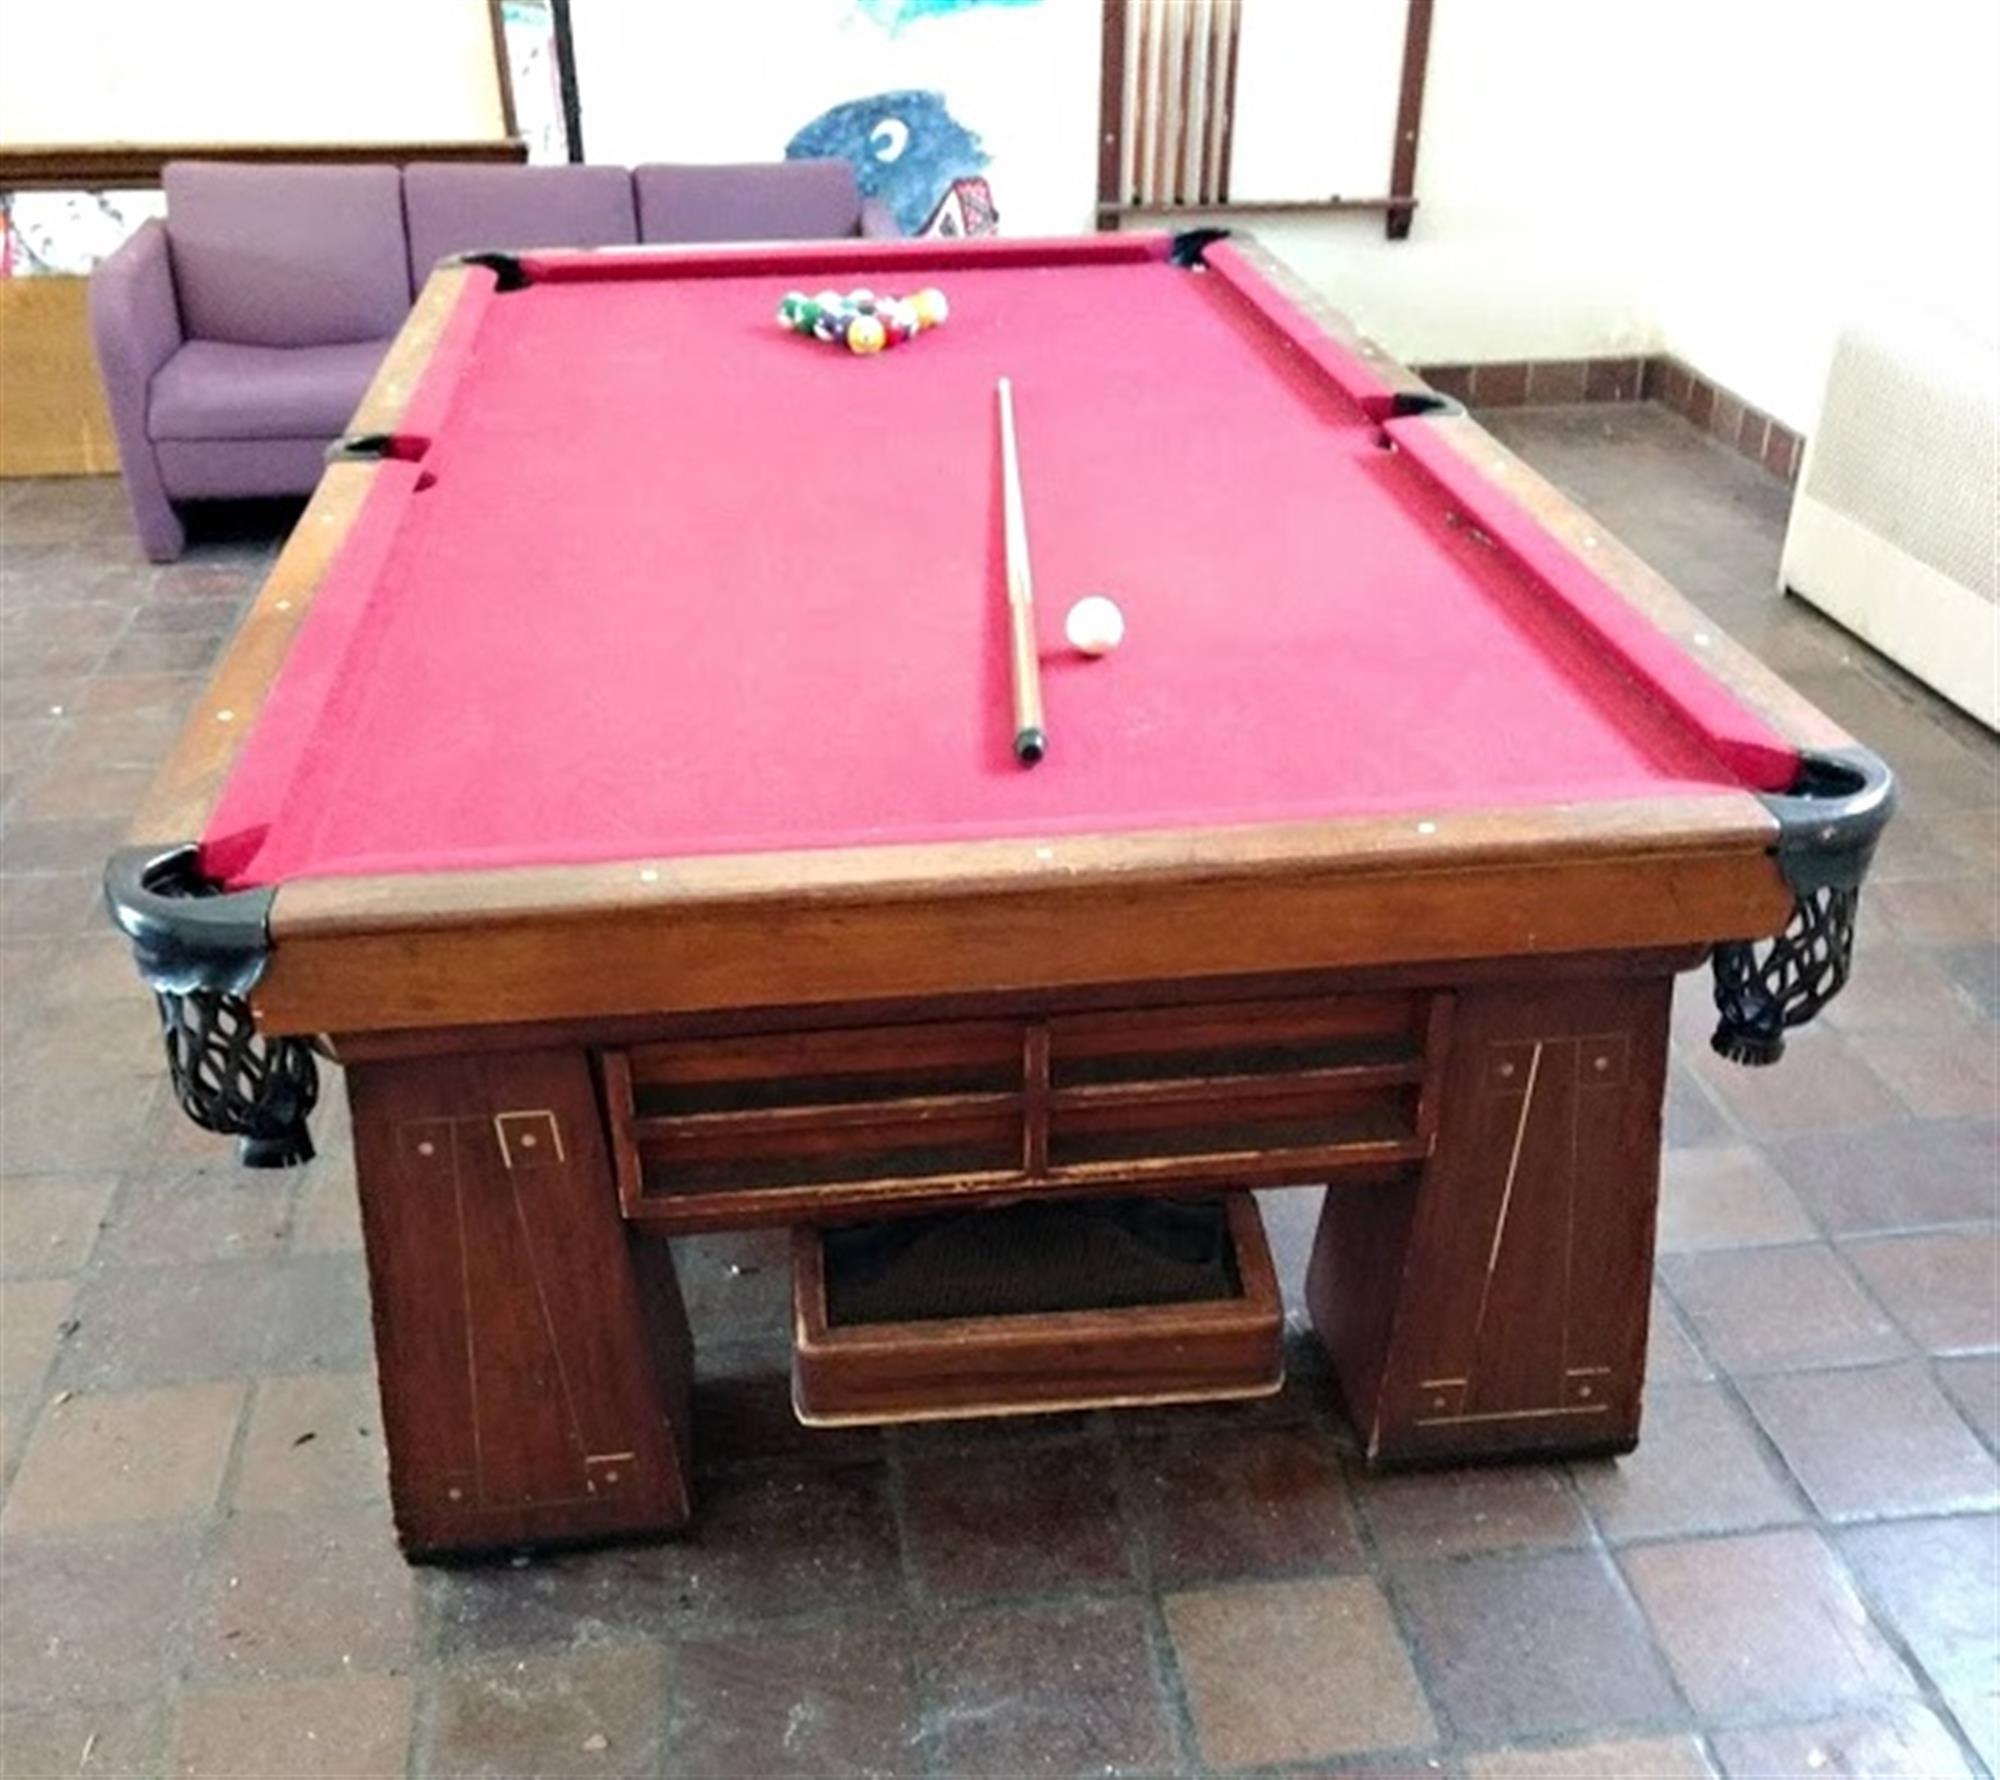 The Brunswick Metropolitan style billiard table was manufactured from 1938-1940. Slate bed below the red felt. American made by the famous Brunswick Billiard Company. In fair condition and in need of restoration. Disassembled right now as too heavy